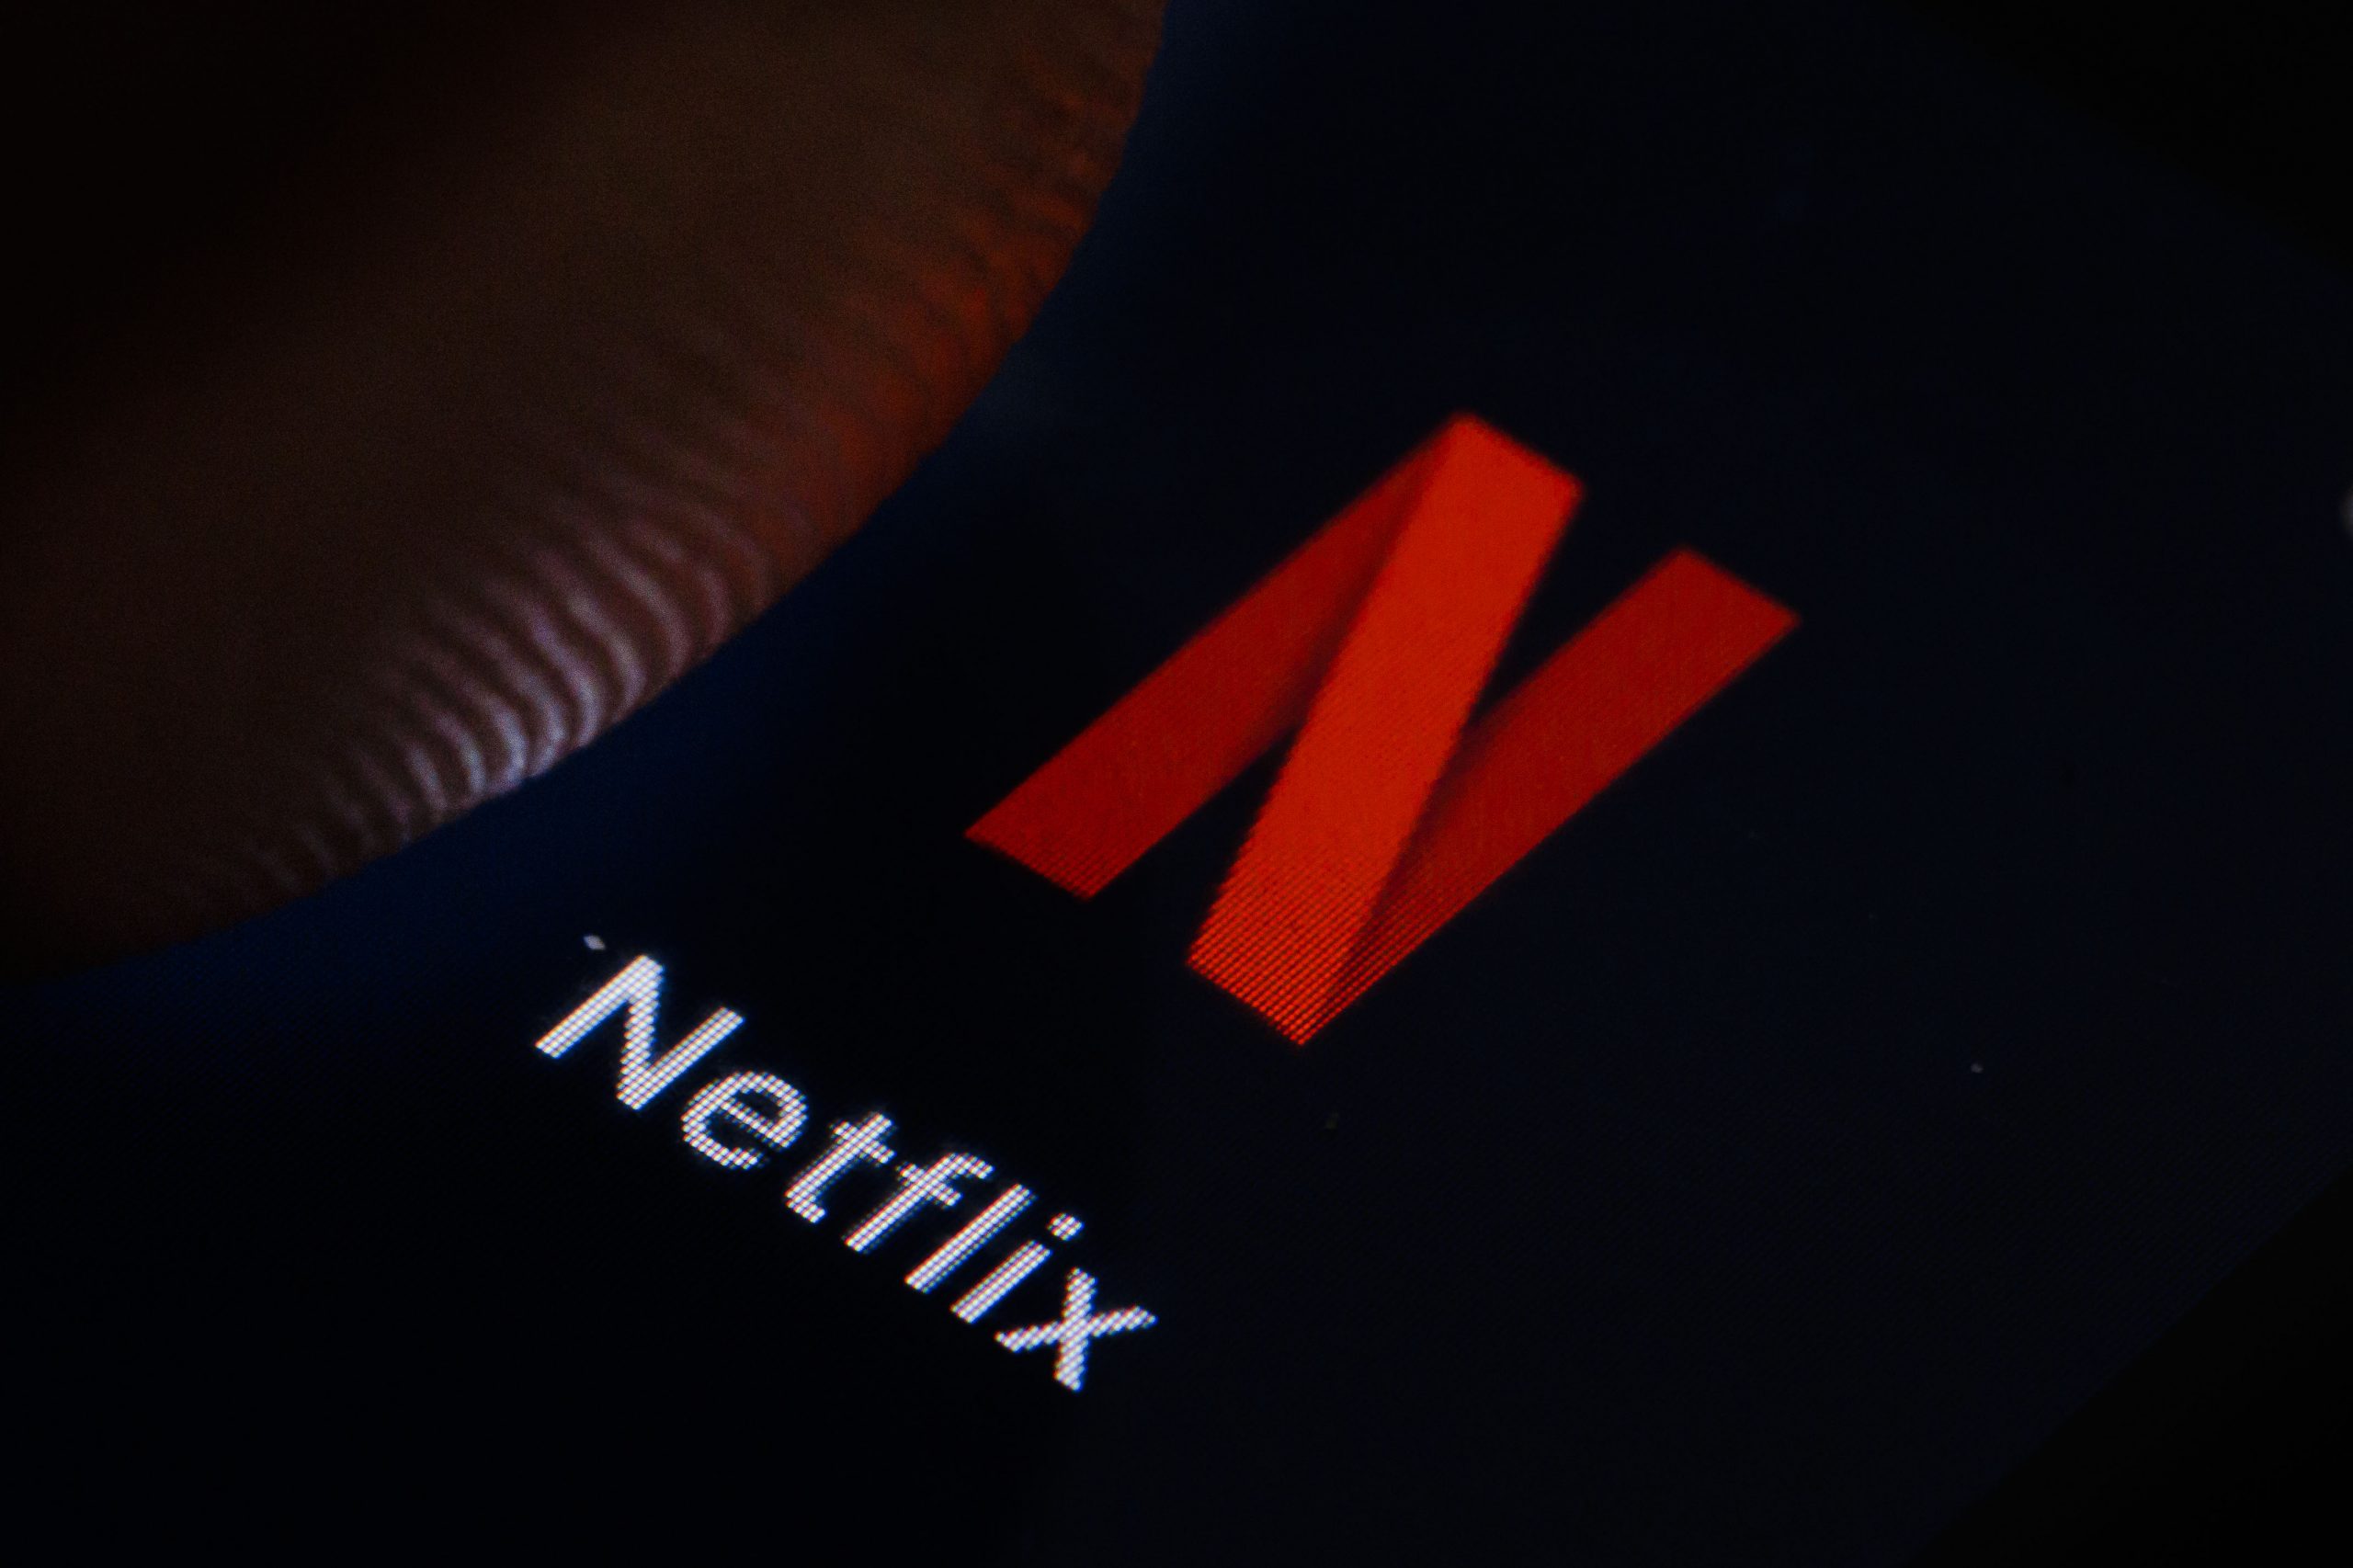 Netflix shares collapse after streaming service says it lost 200,000 subscribers - and could lose 2 million more